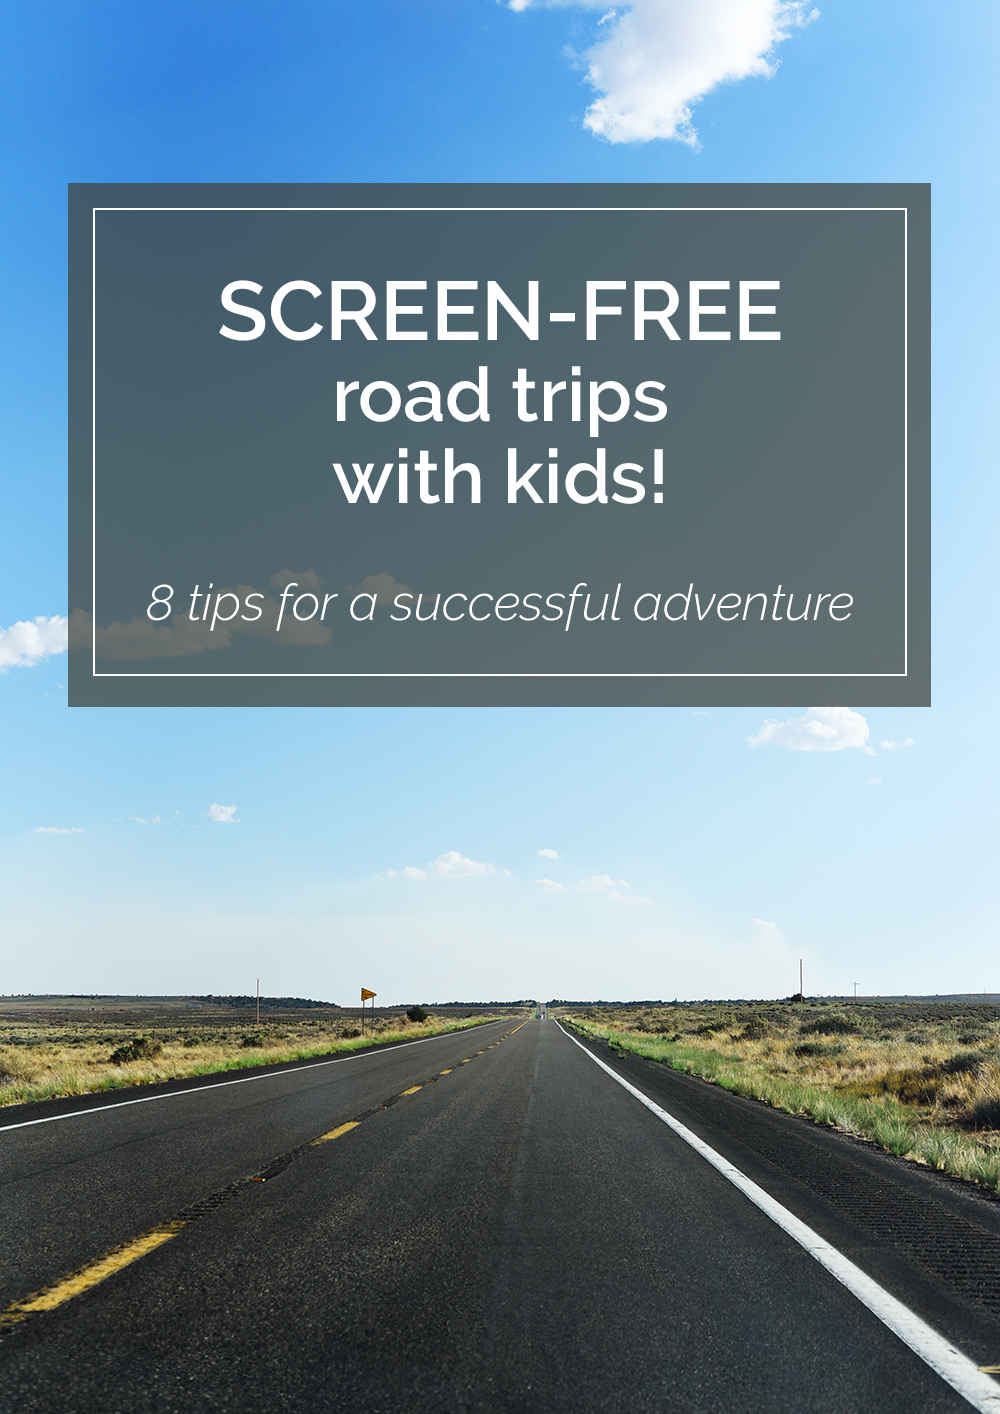 8 tips for a successful screen-free road trip with kids. It can be done AND it can be fun!